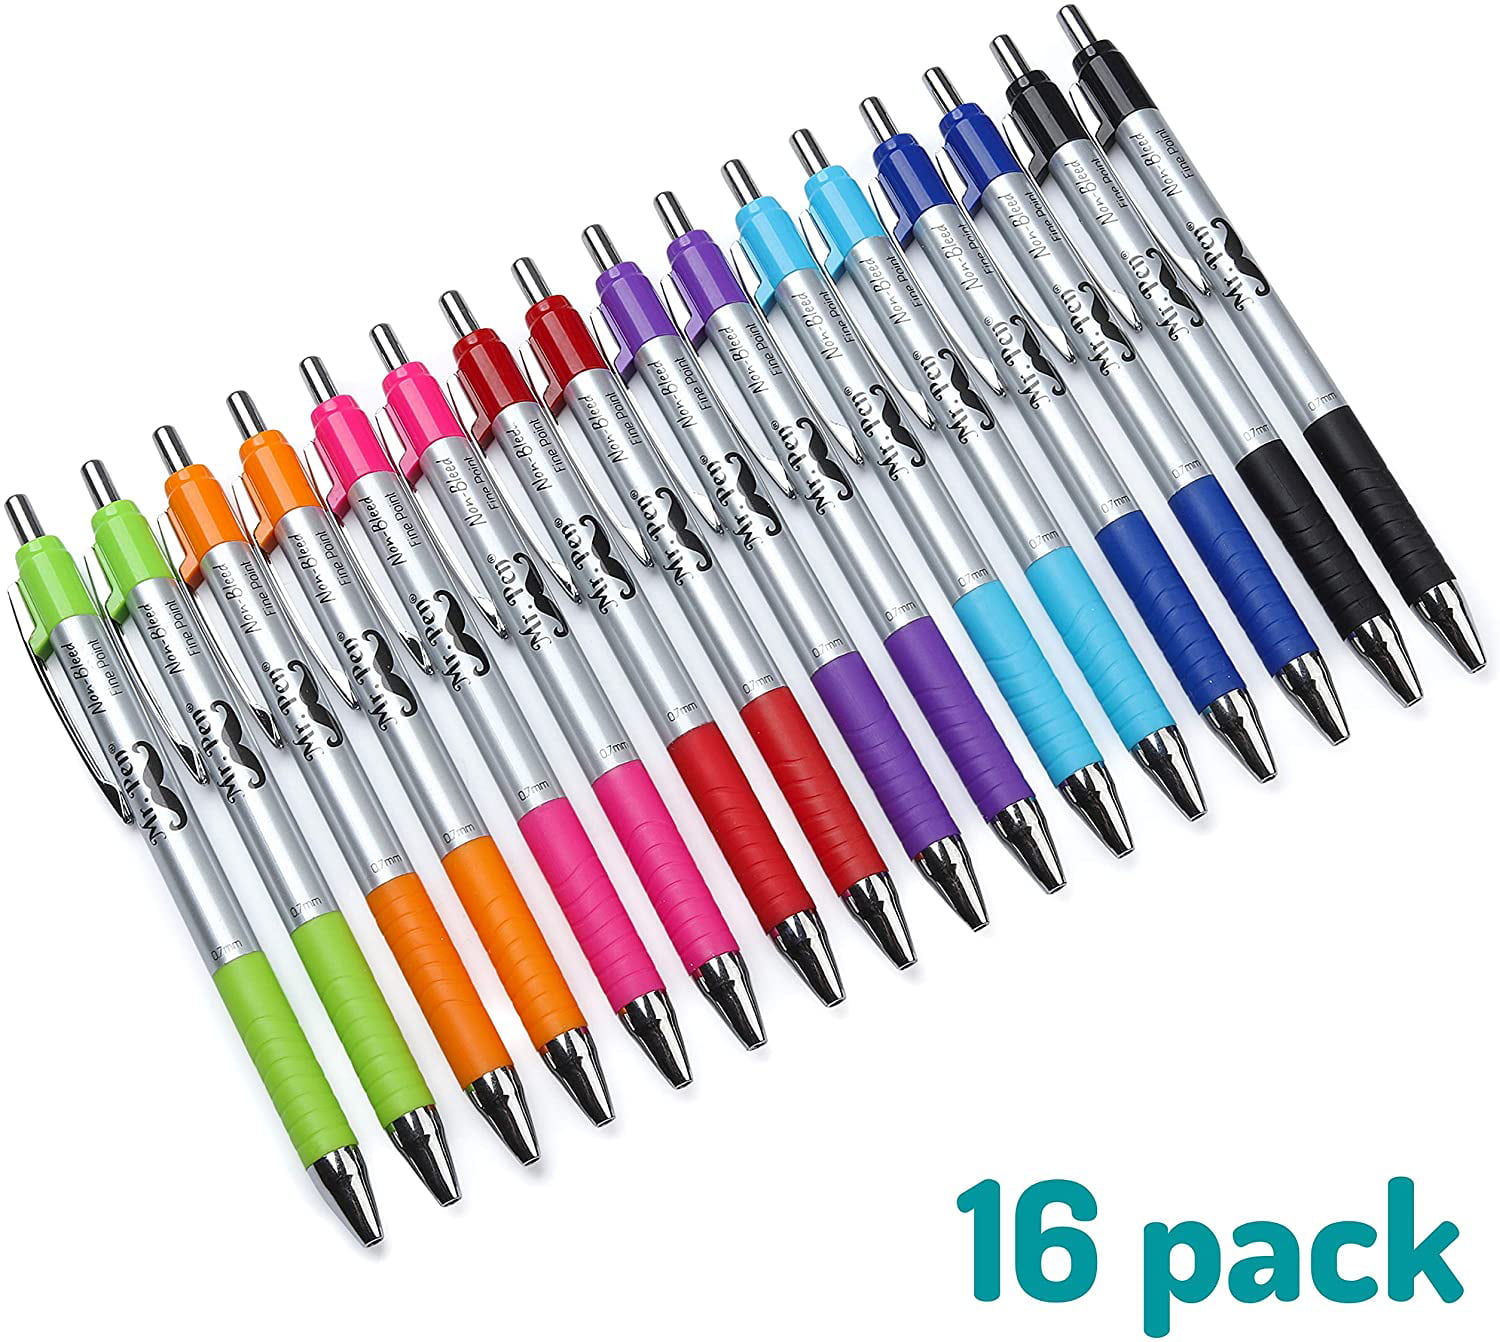 for Journal Planner Note Taking and vividly Fine Point Fineliner Markers Drawing Marker Pens,Porous-Point Pens,Line Colored Sketch Writing Drawing Pens goodshare 36 Colors Journal Planner Pens 